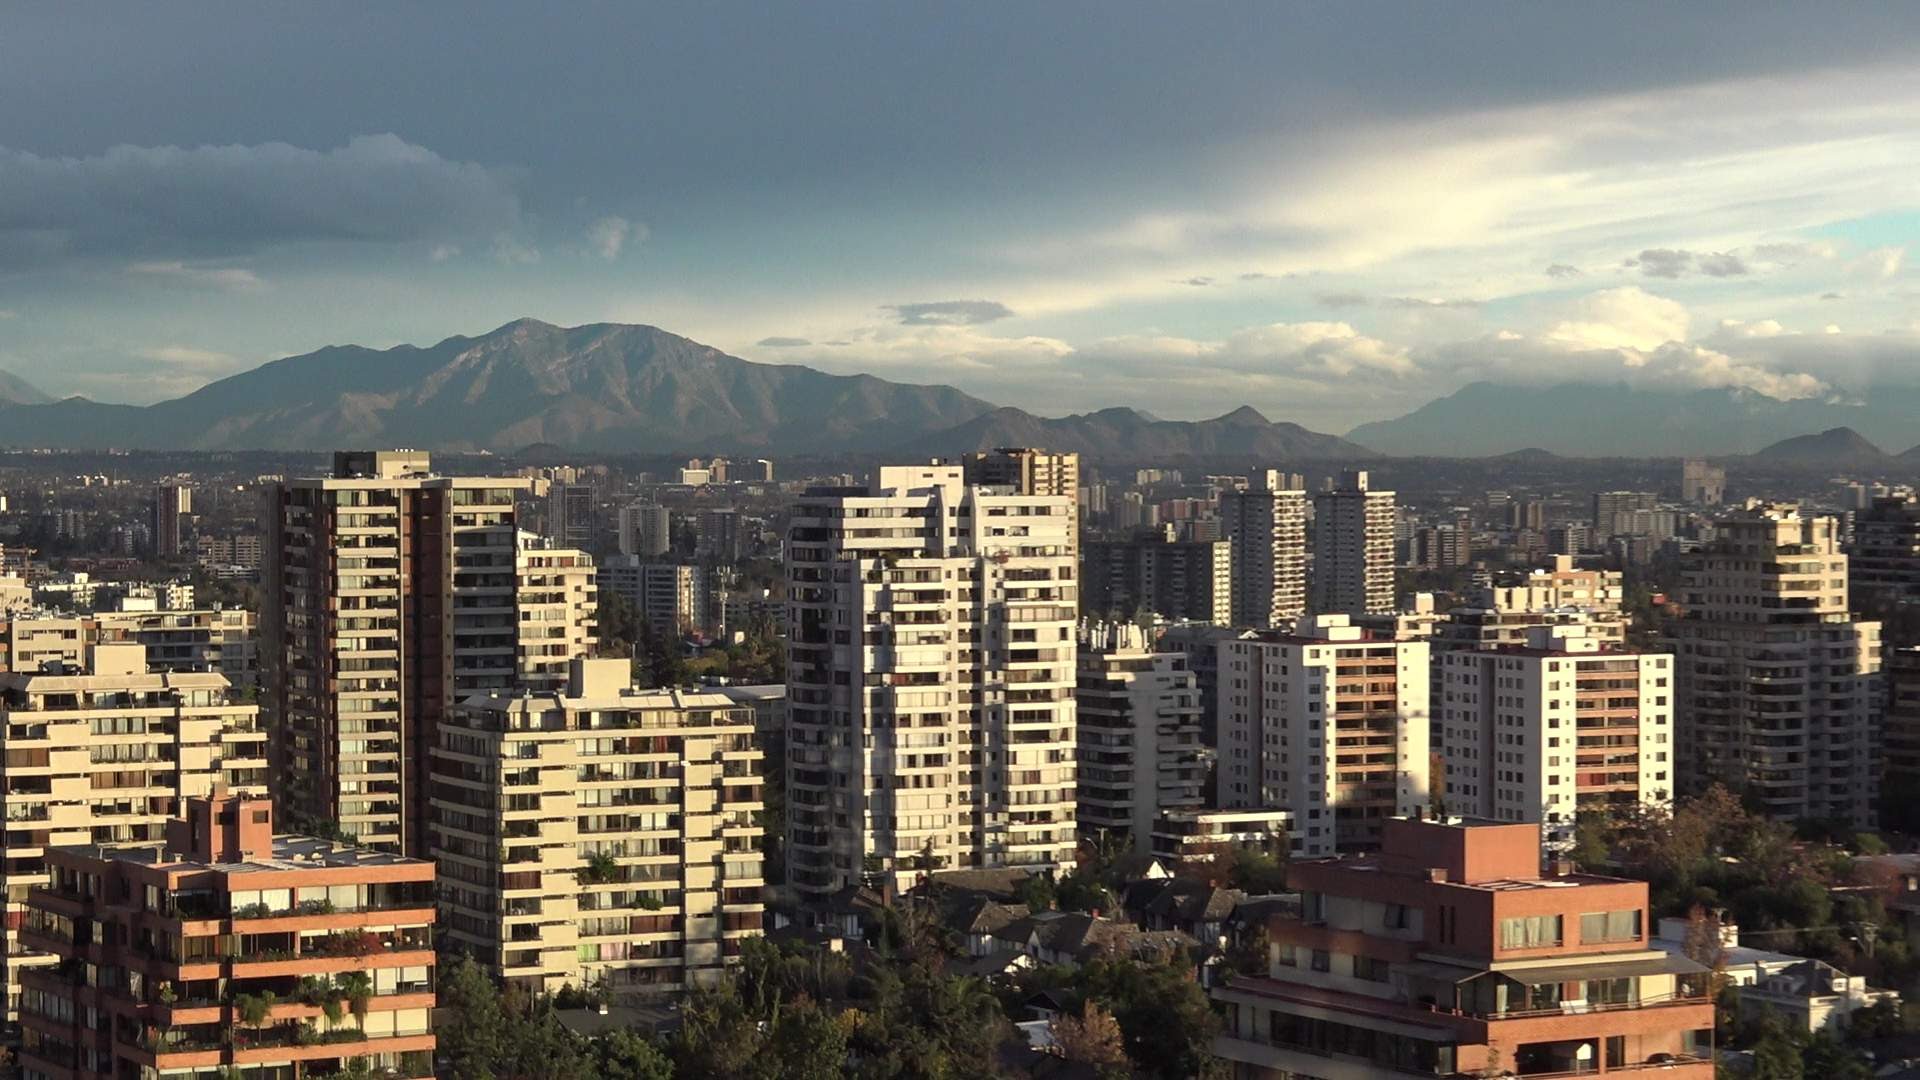 Santiago de Chile the most developed city in South America - YouTube